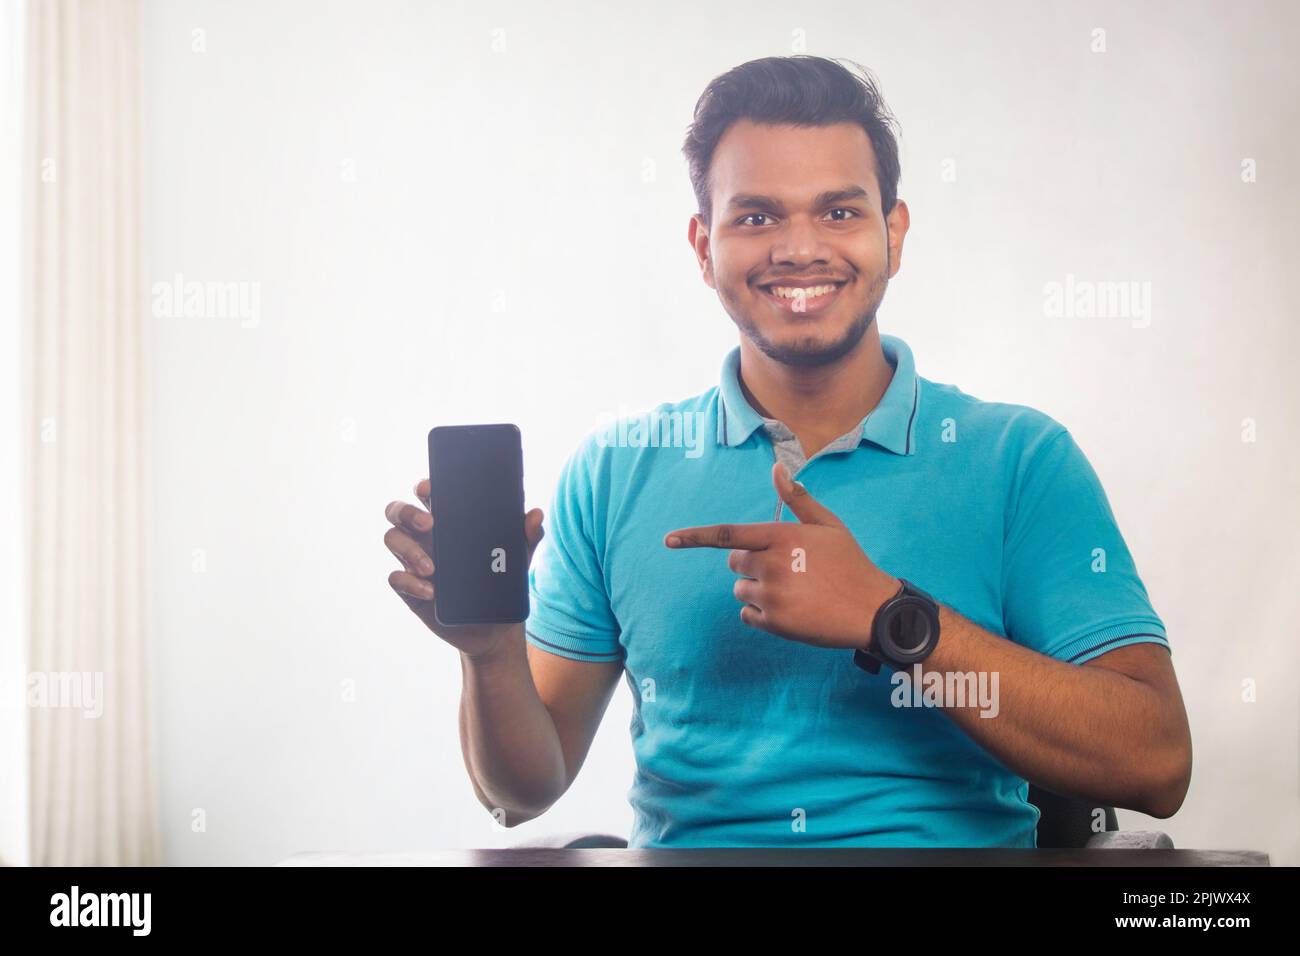 Portrait of a young man showing mobile phone in his hand Stock Photo